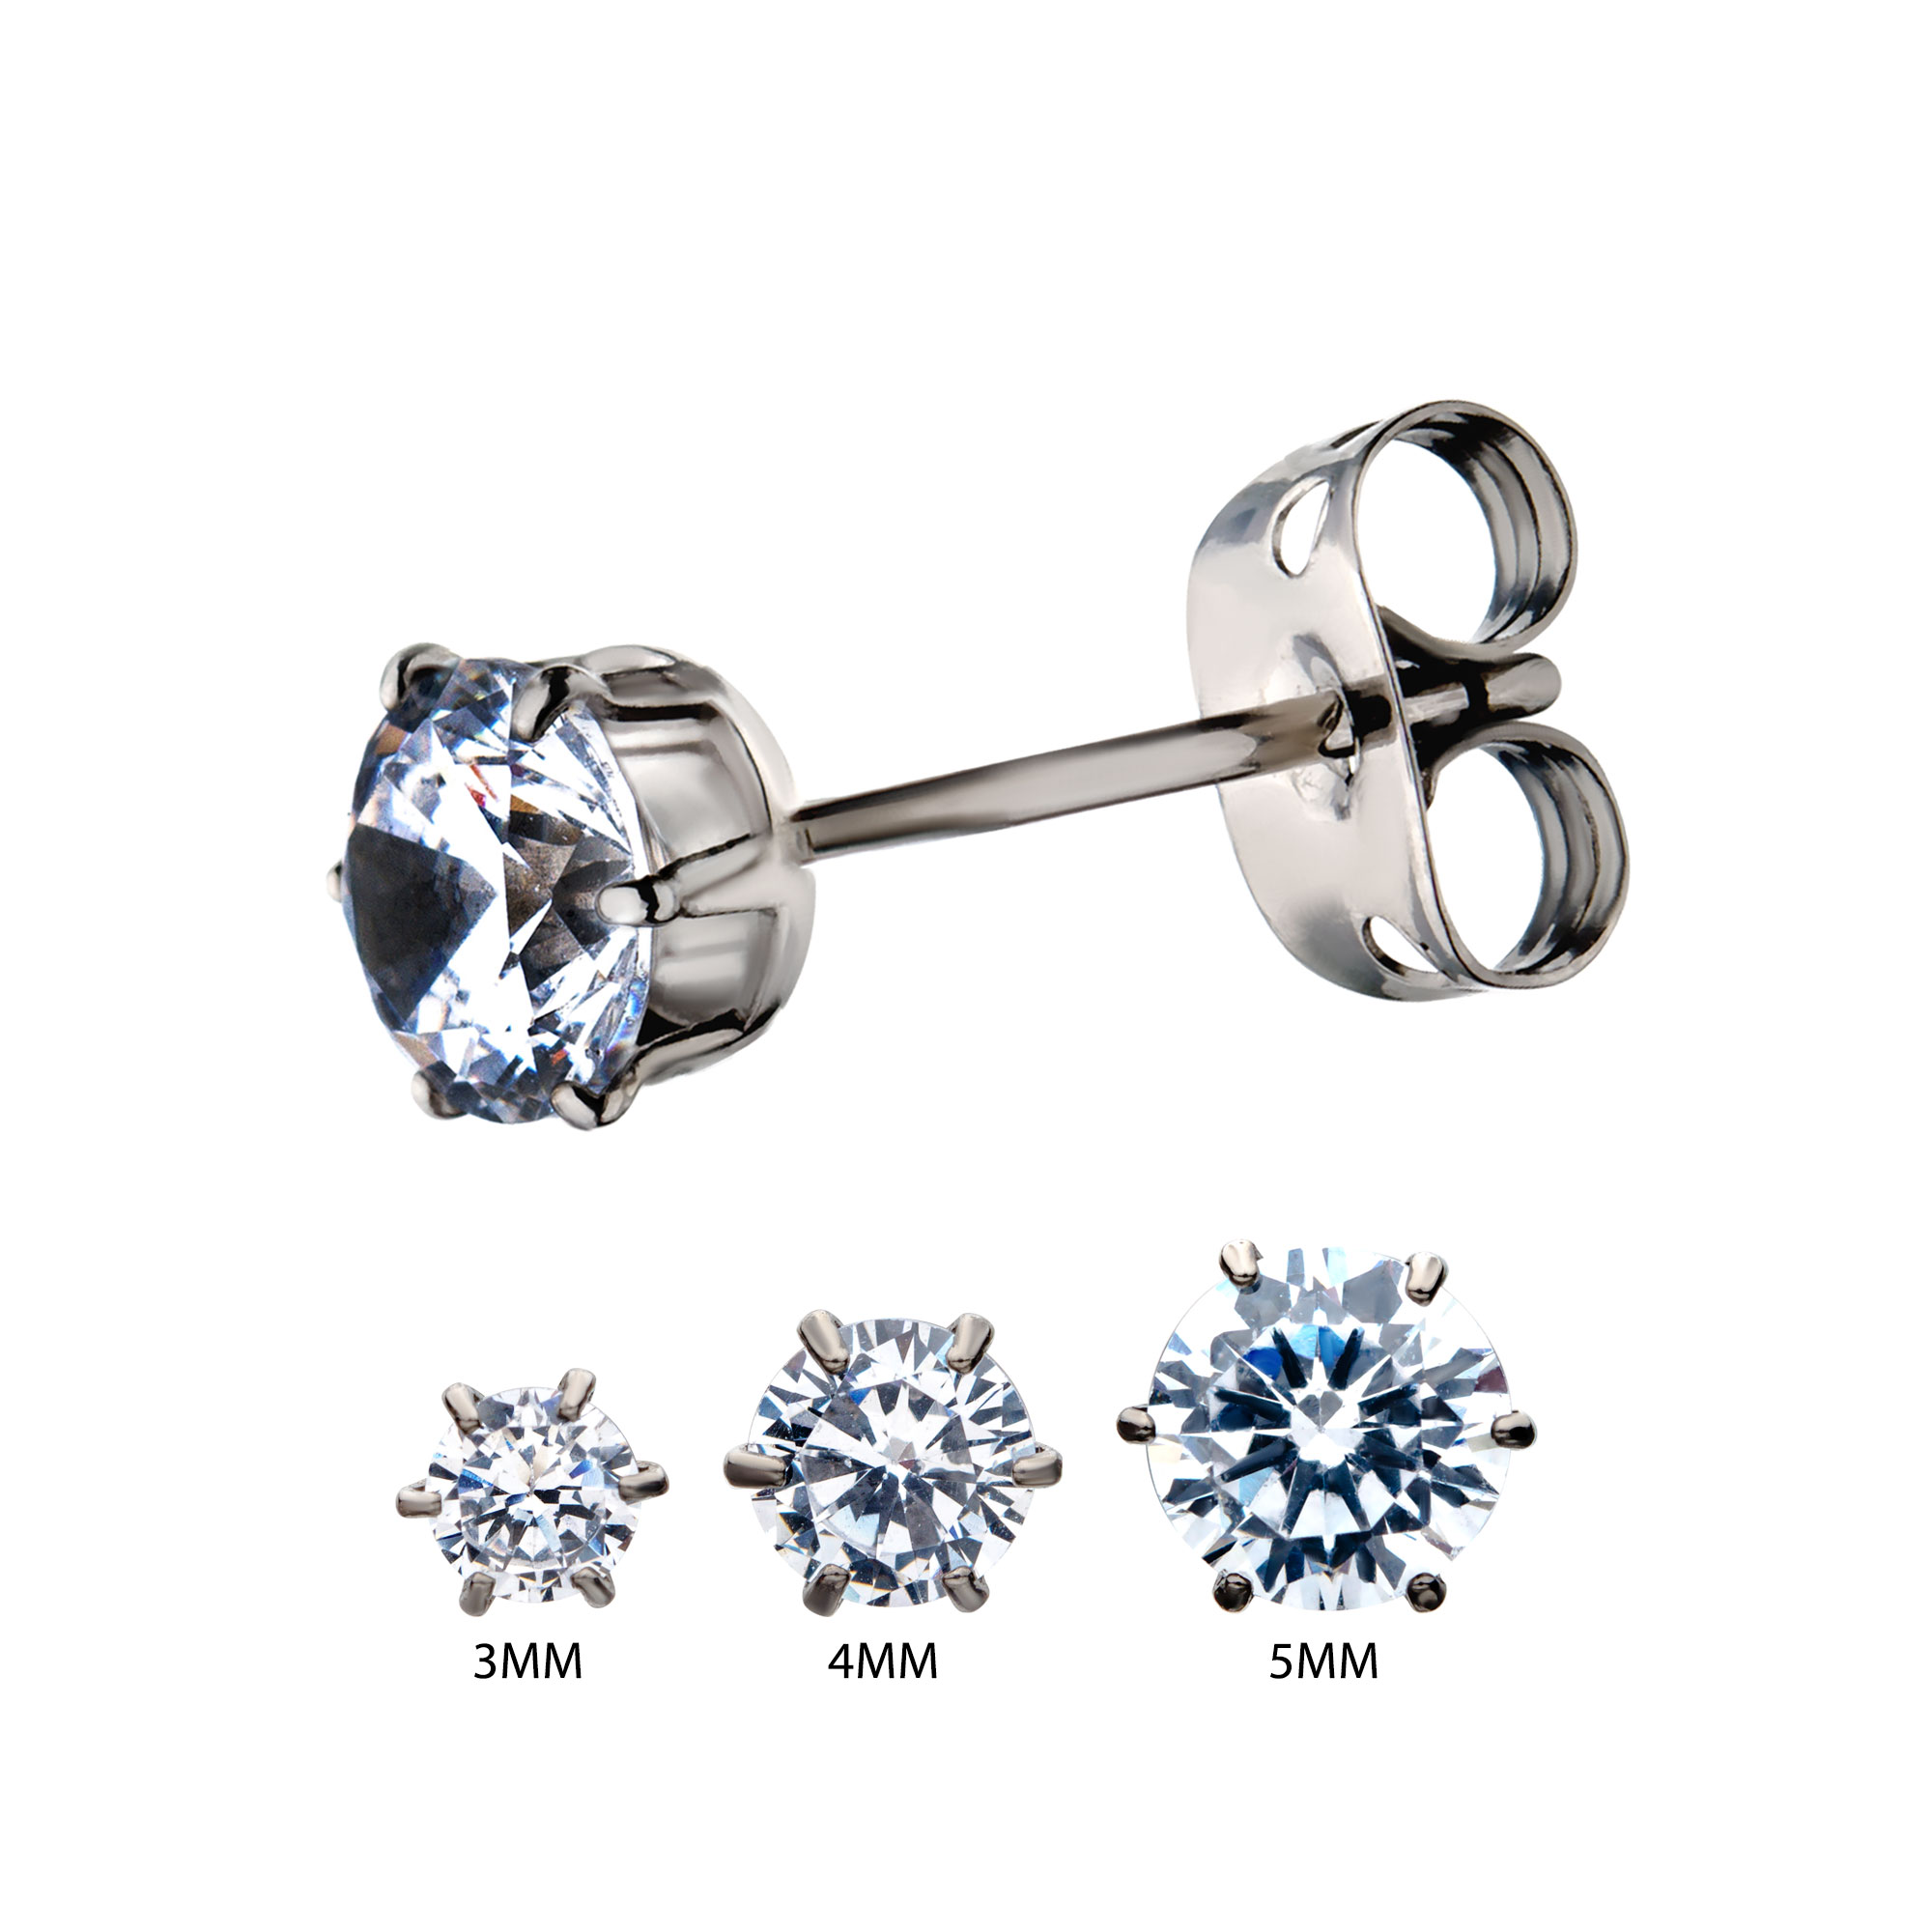 20g Titanium Post and Butterfly Back with Prong Set CZ Stud Earrings K. Martin Jeweler Dodge City, KS